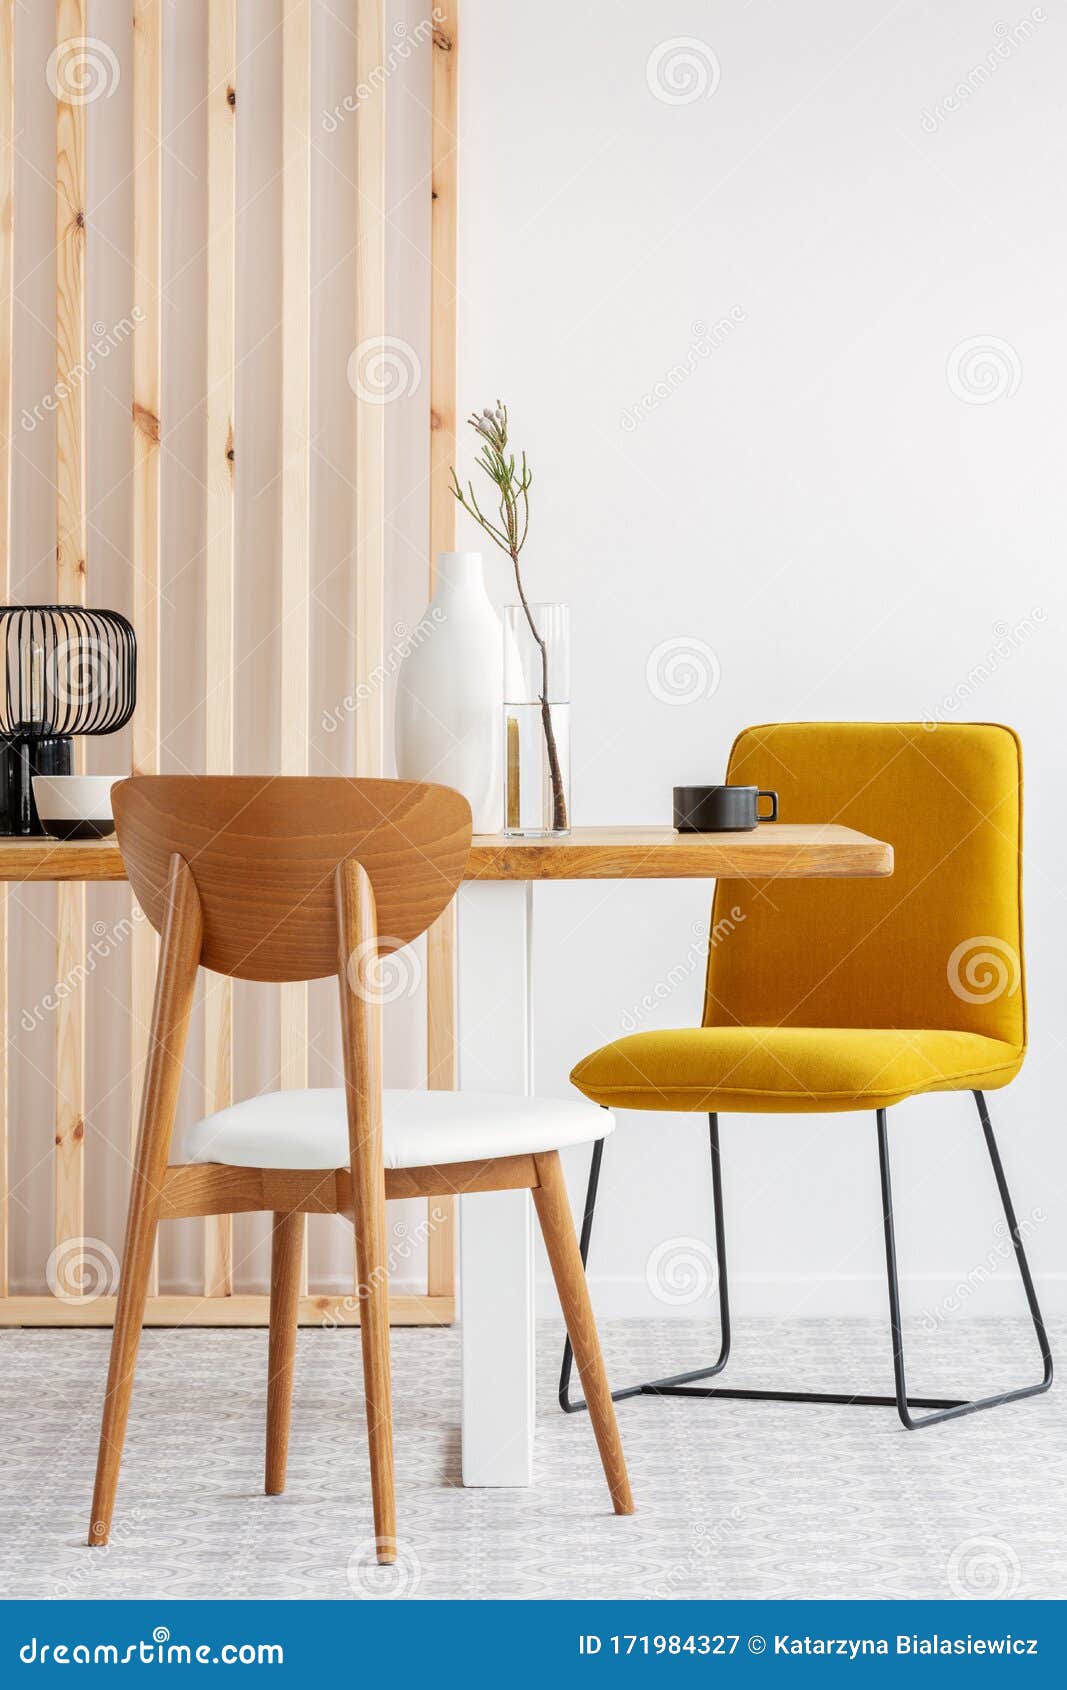 Stylish Yellow Chair At Wooden Dining Table In Trendy Interior Stock Image Image Of Inspiration Kitchen 171984327,Best Fake Designer Website